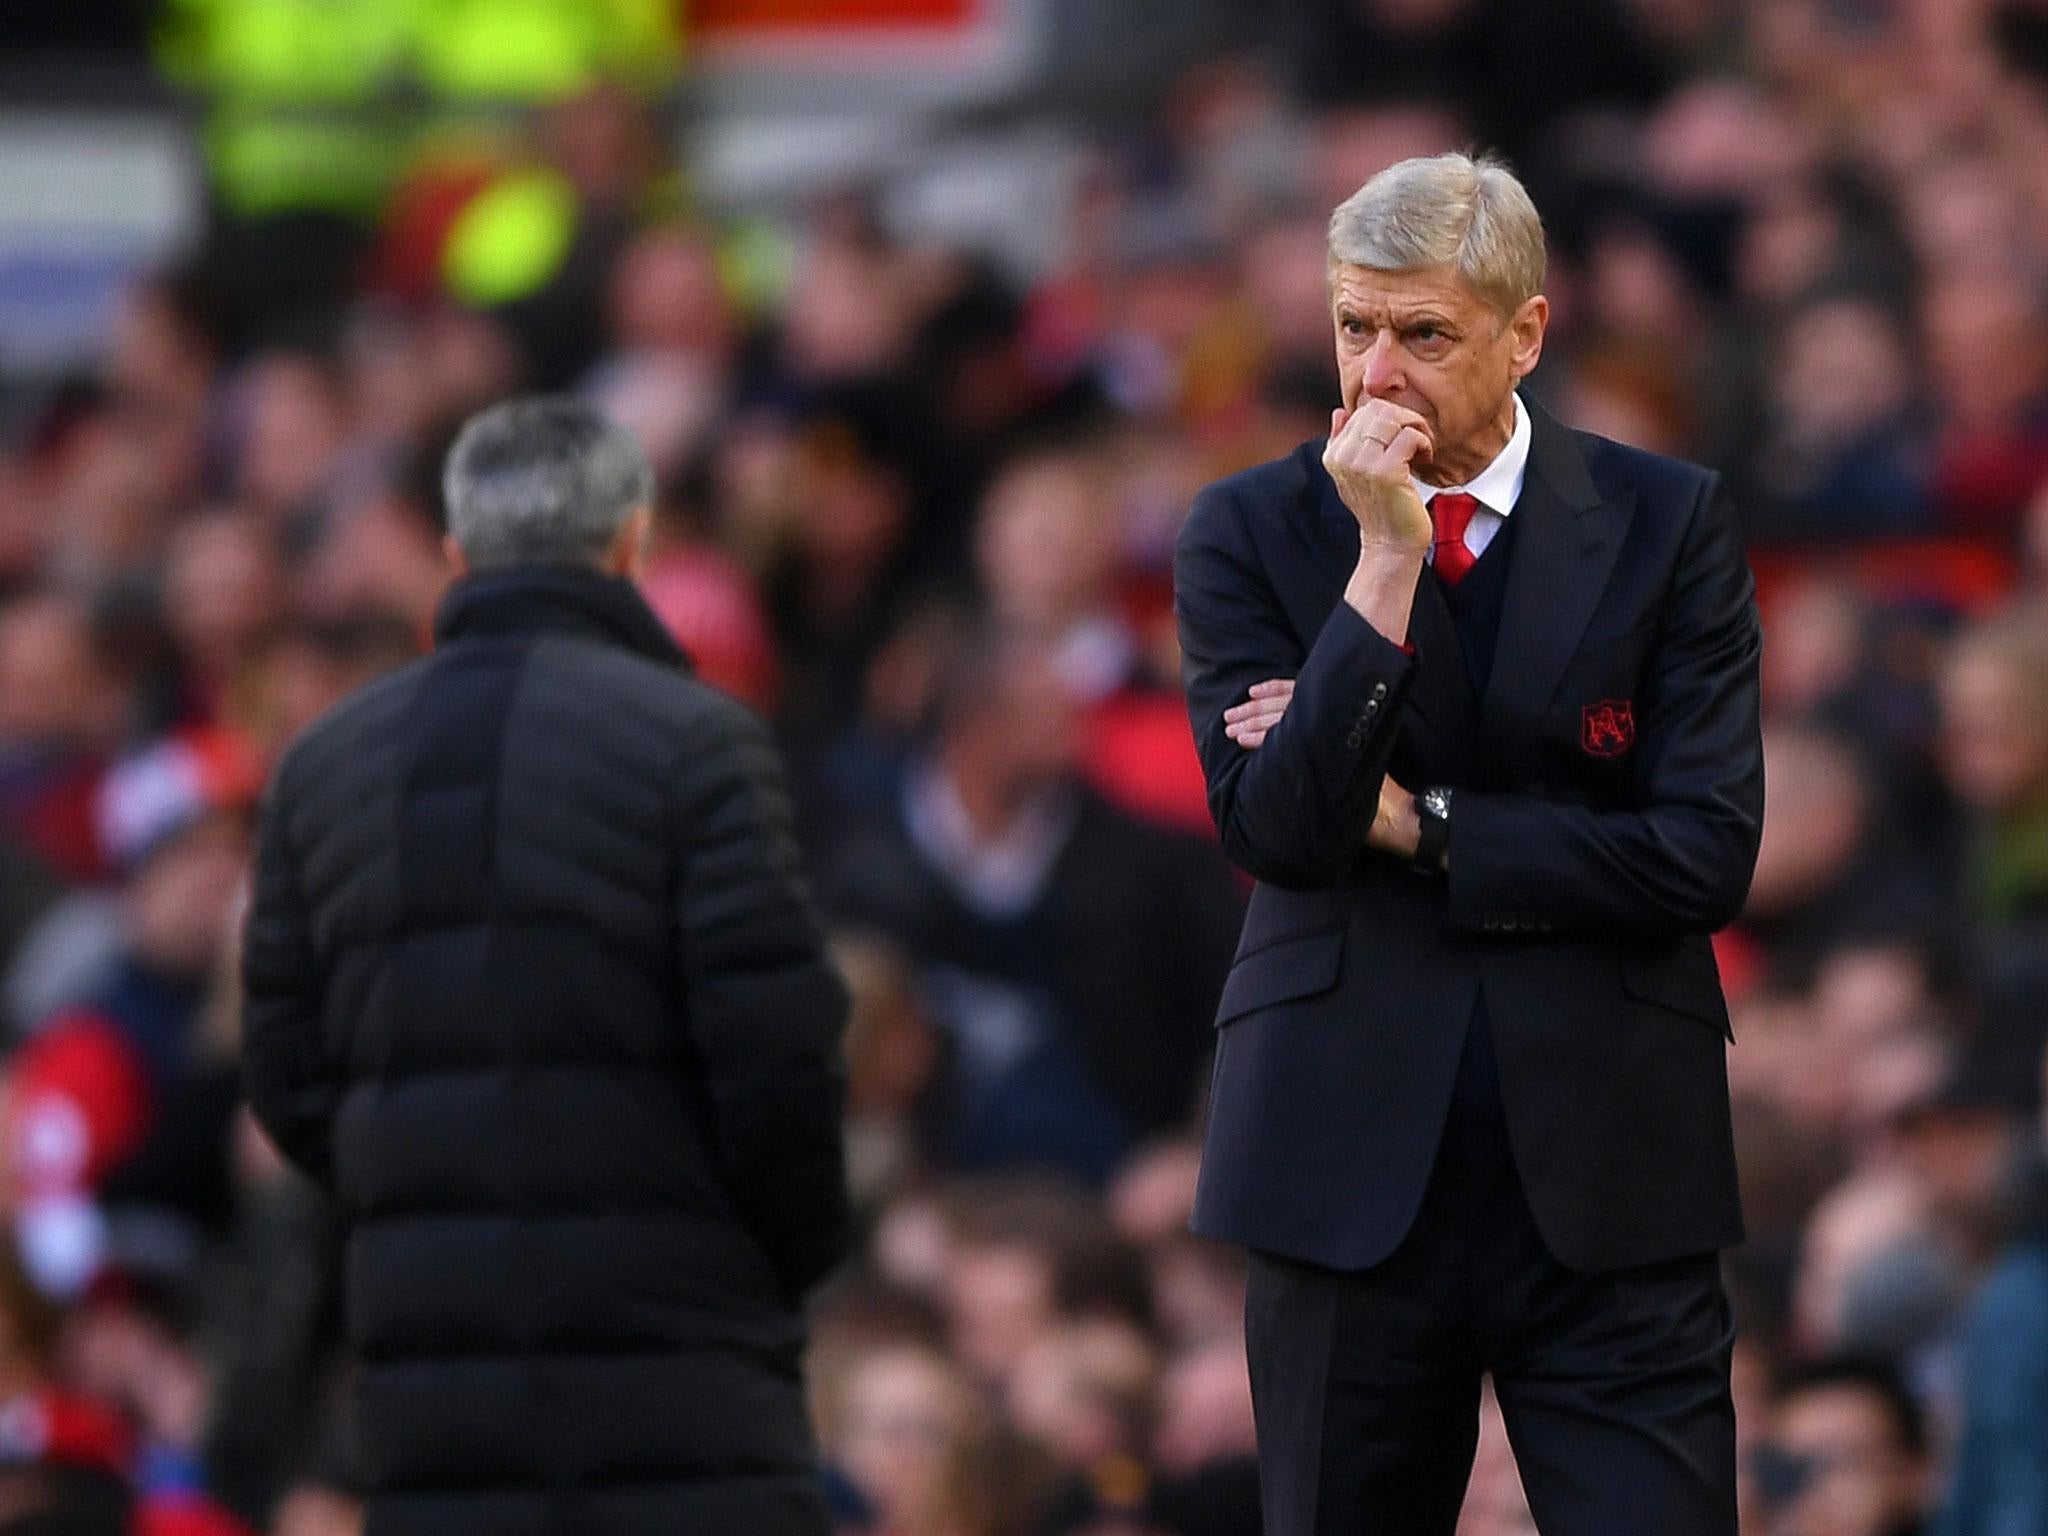 Arsene Wenger believes Arsenal's 1-1 draw at Manchester United felt like more than a draw for his side